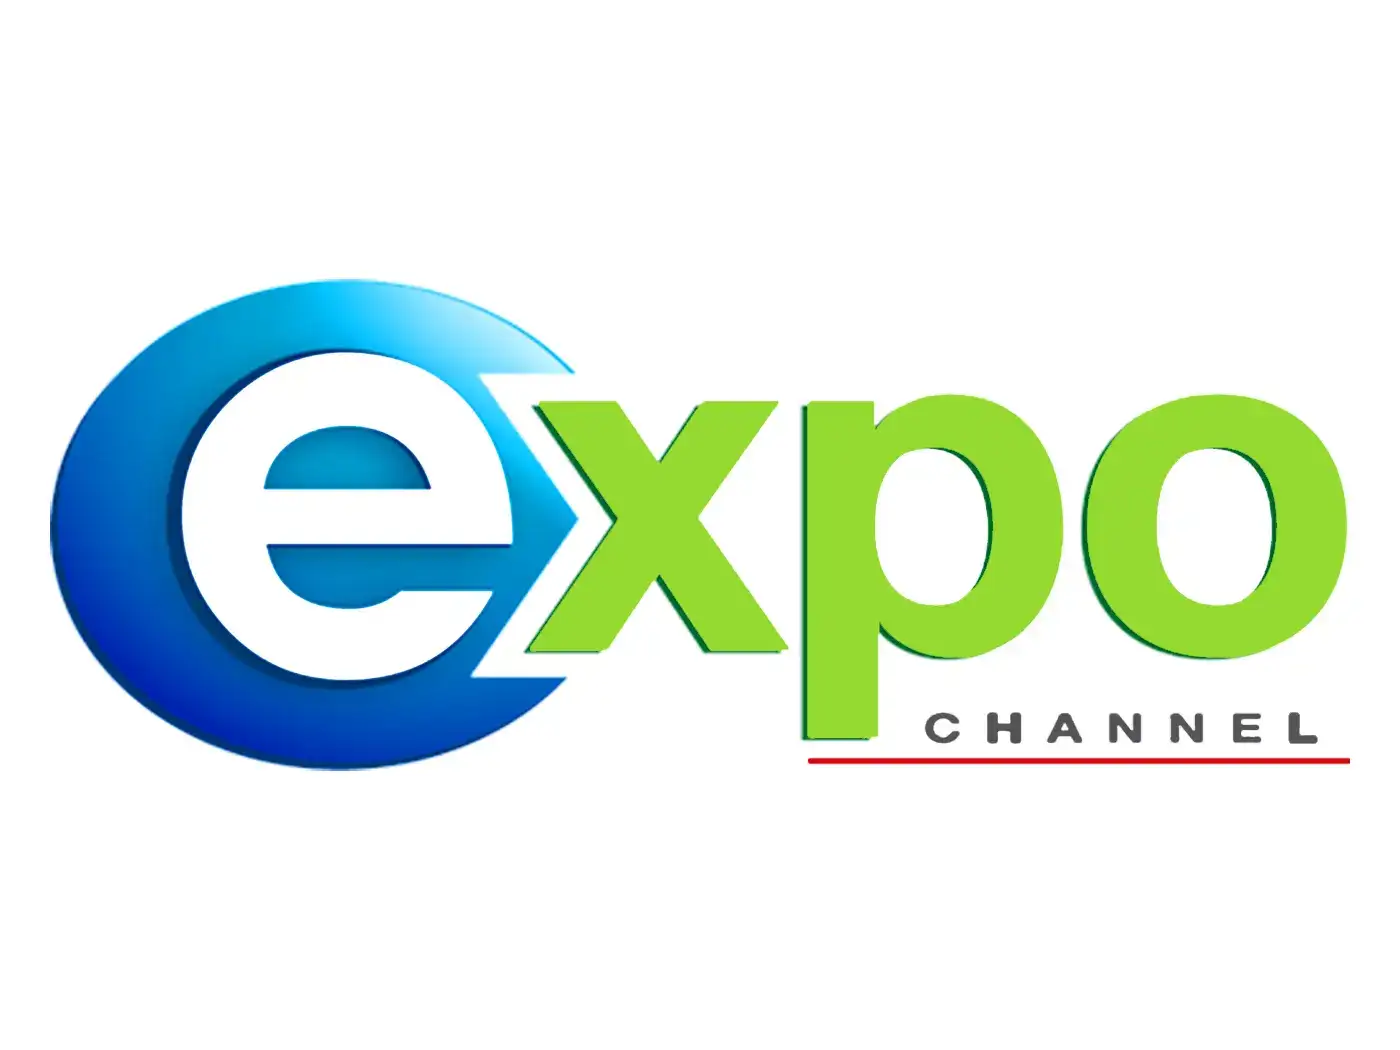 Expo Channel live